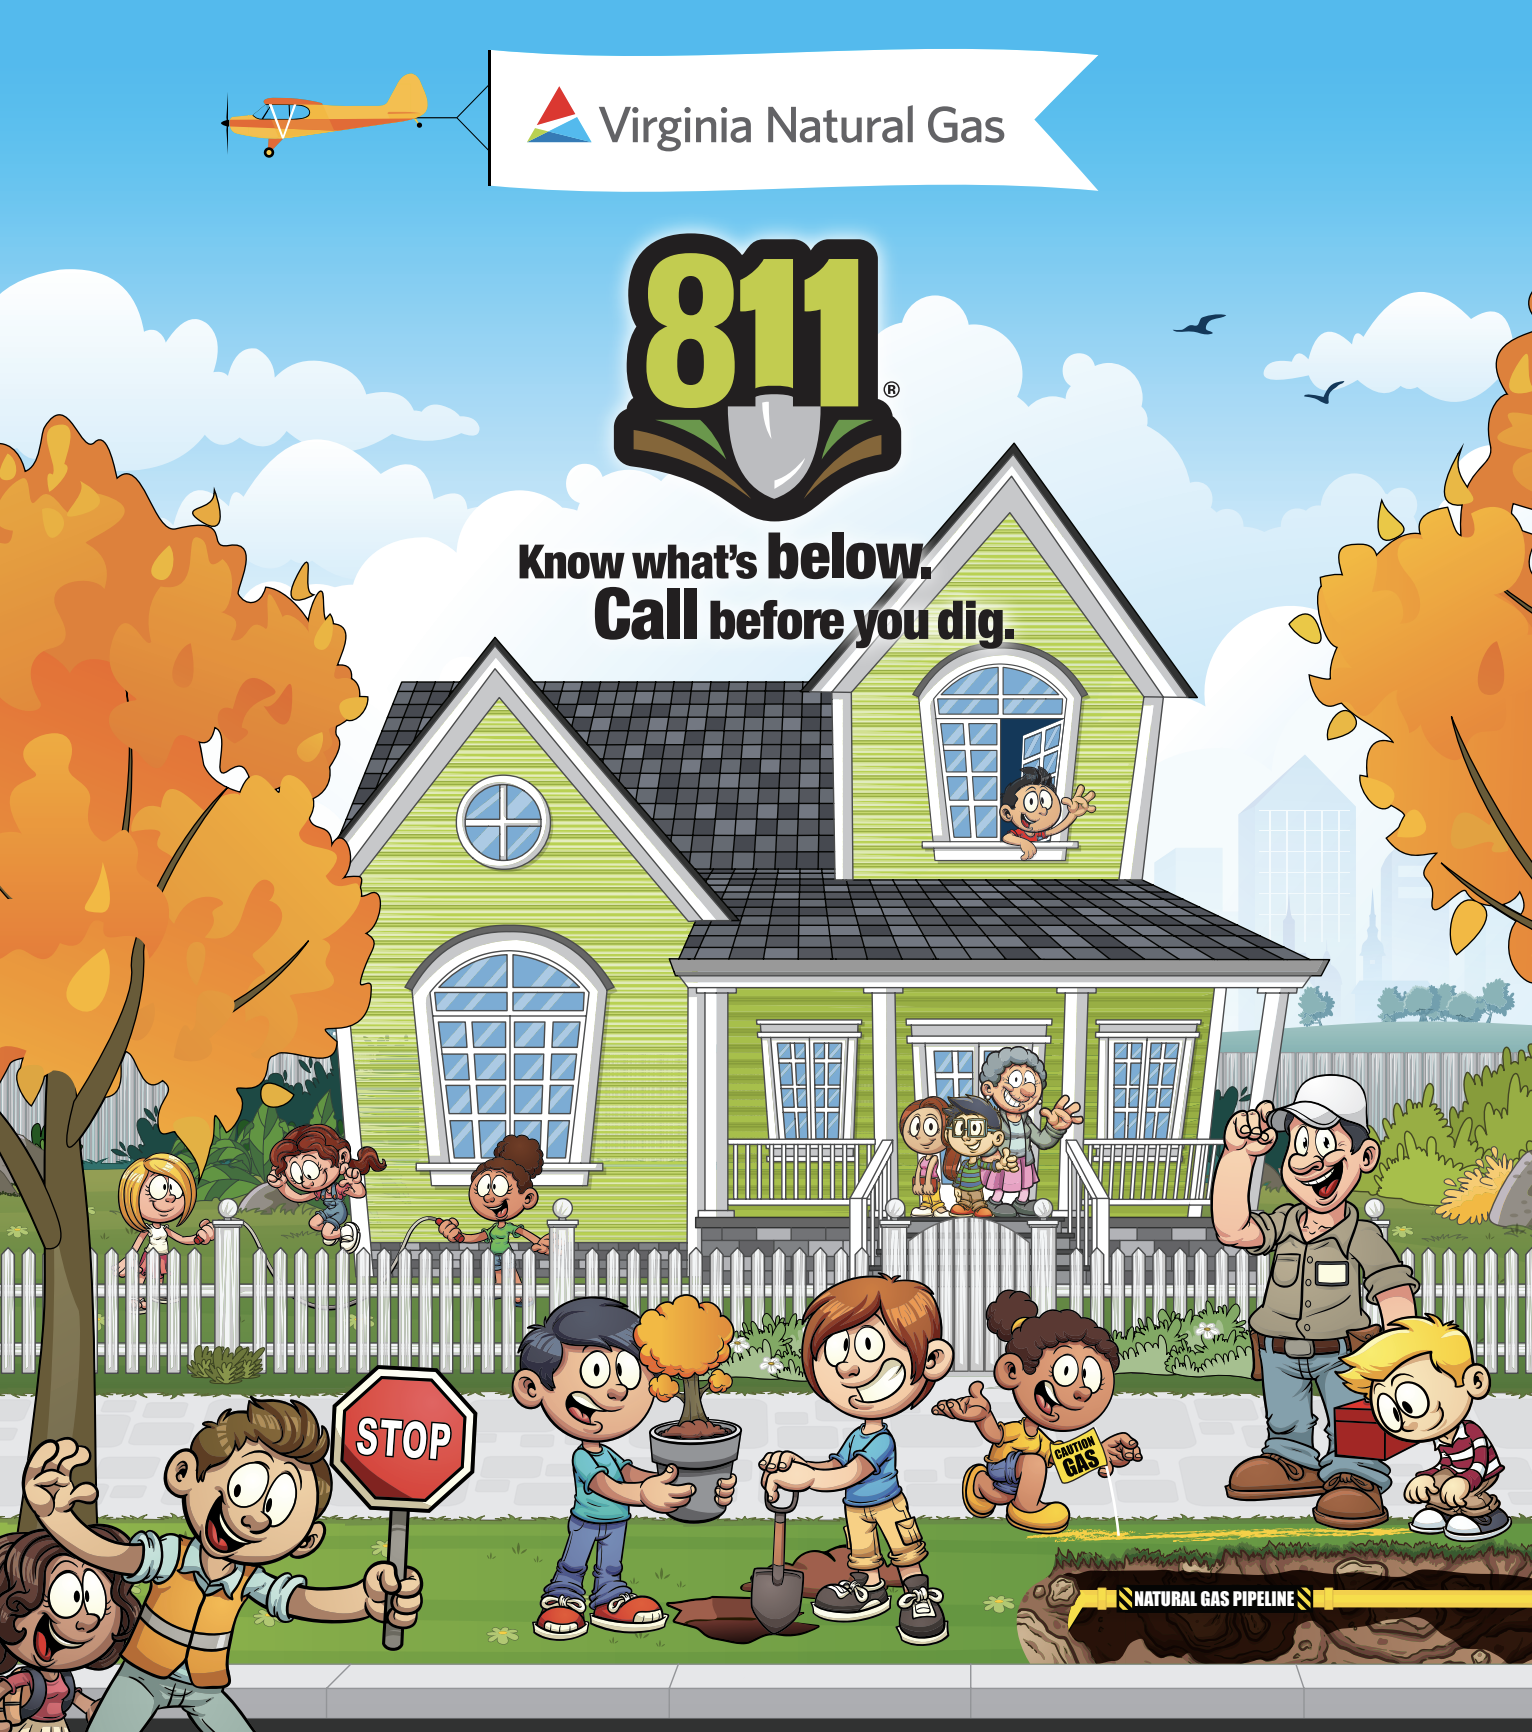 Keep children occupied while homeschooling with the Safe Digging Arcade- a digital learning tool that teaches kids about natural gas safety.